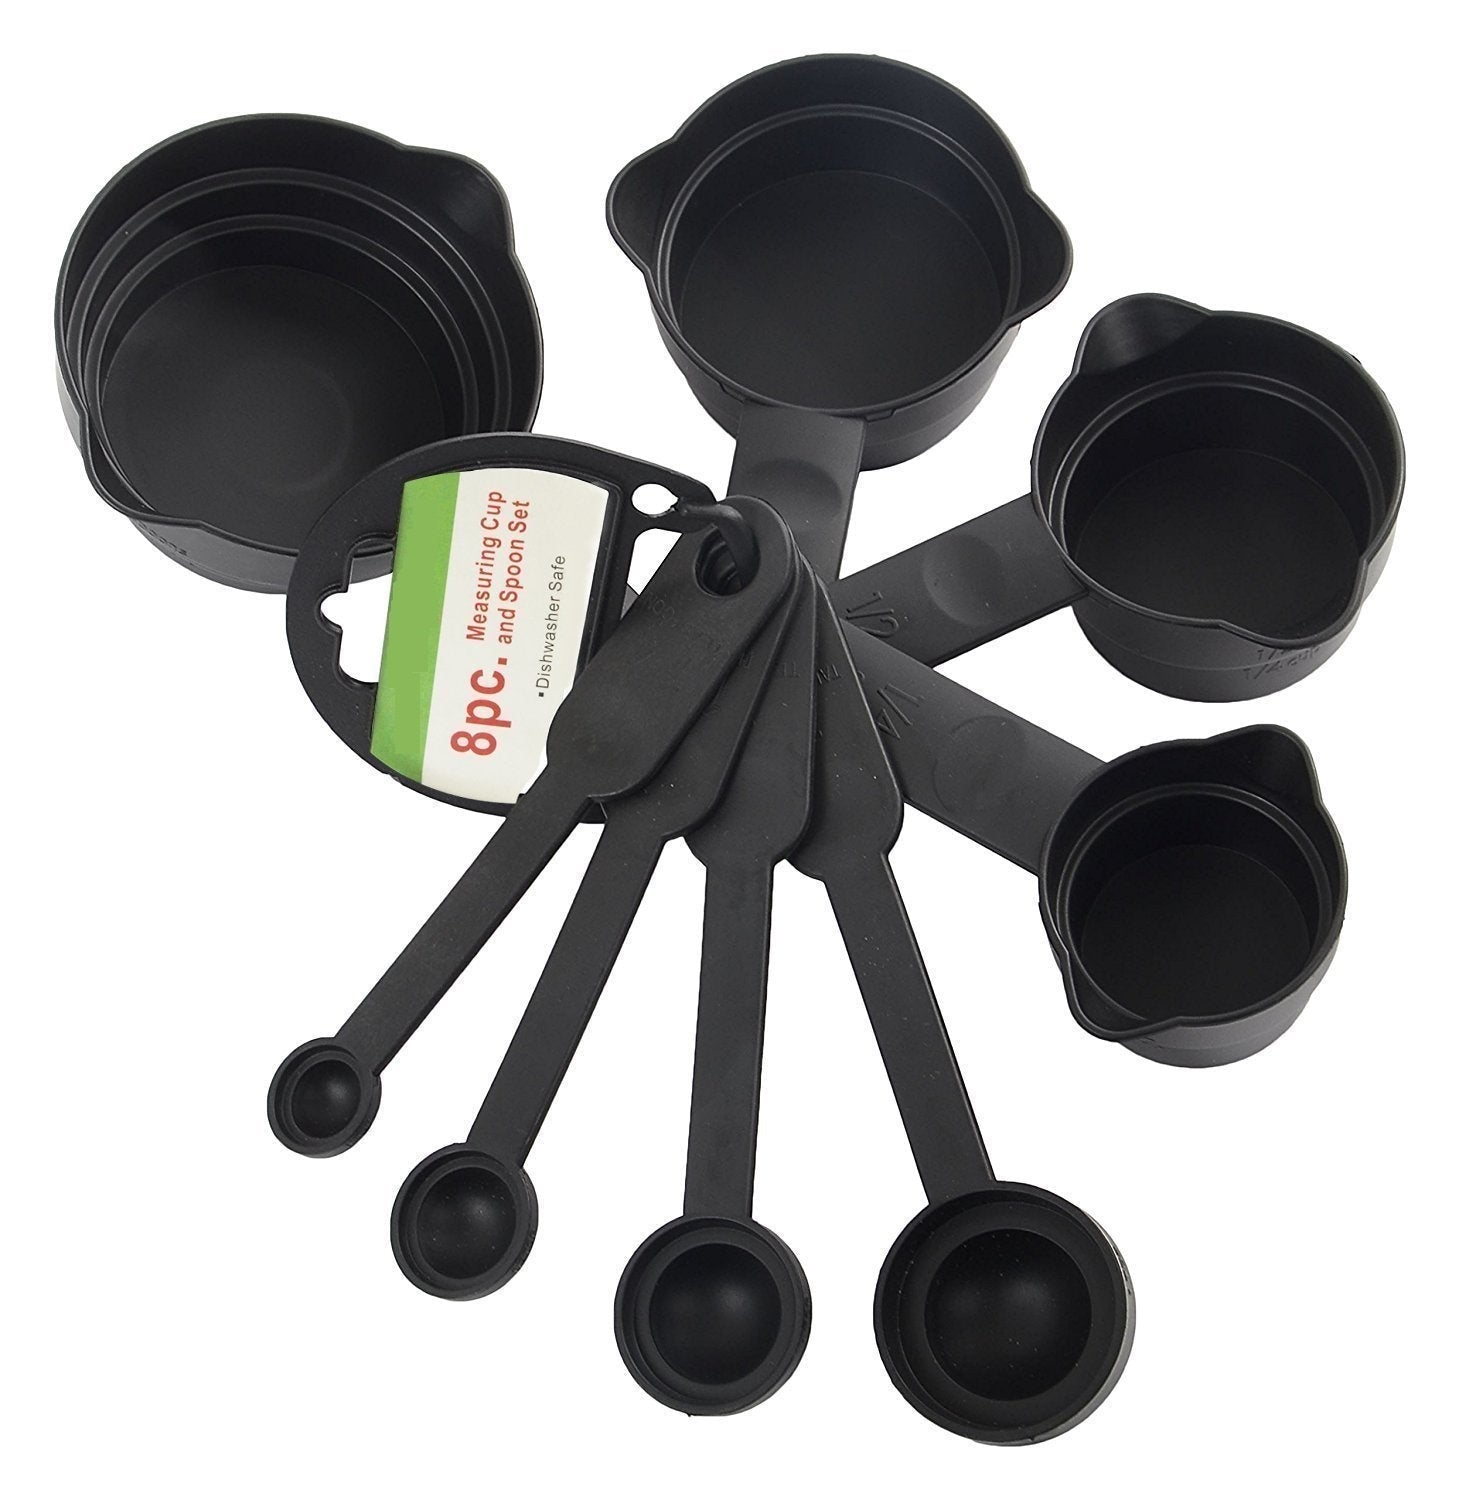 106 Plastic Measuring Cups and Spoons (8 Pcs, Black) TOSS